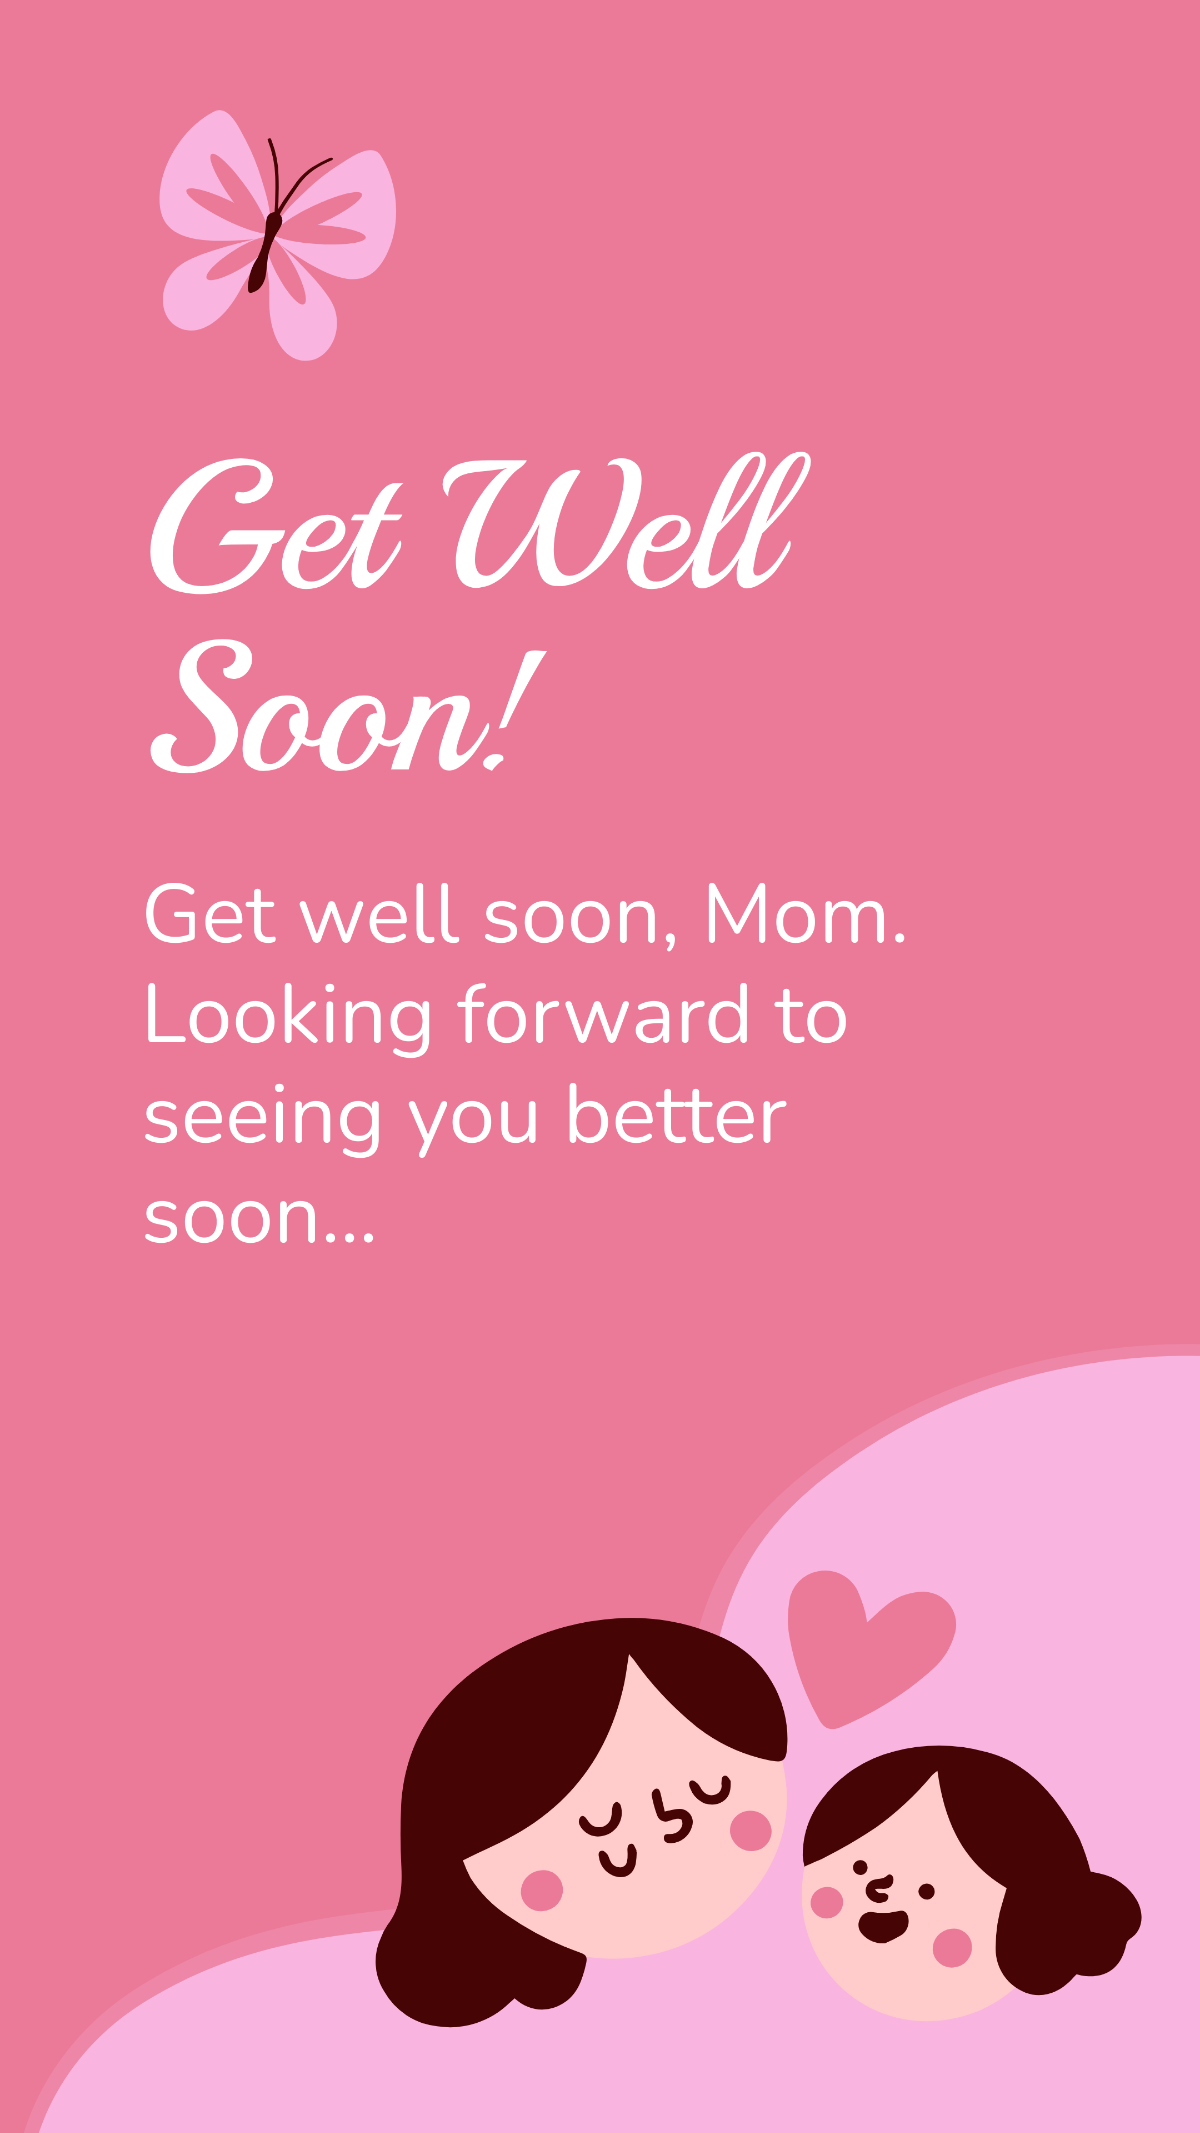 Get Well Soon Message For Mom